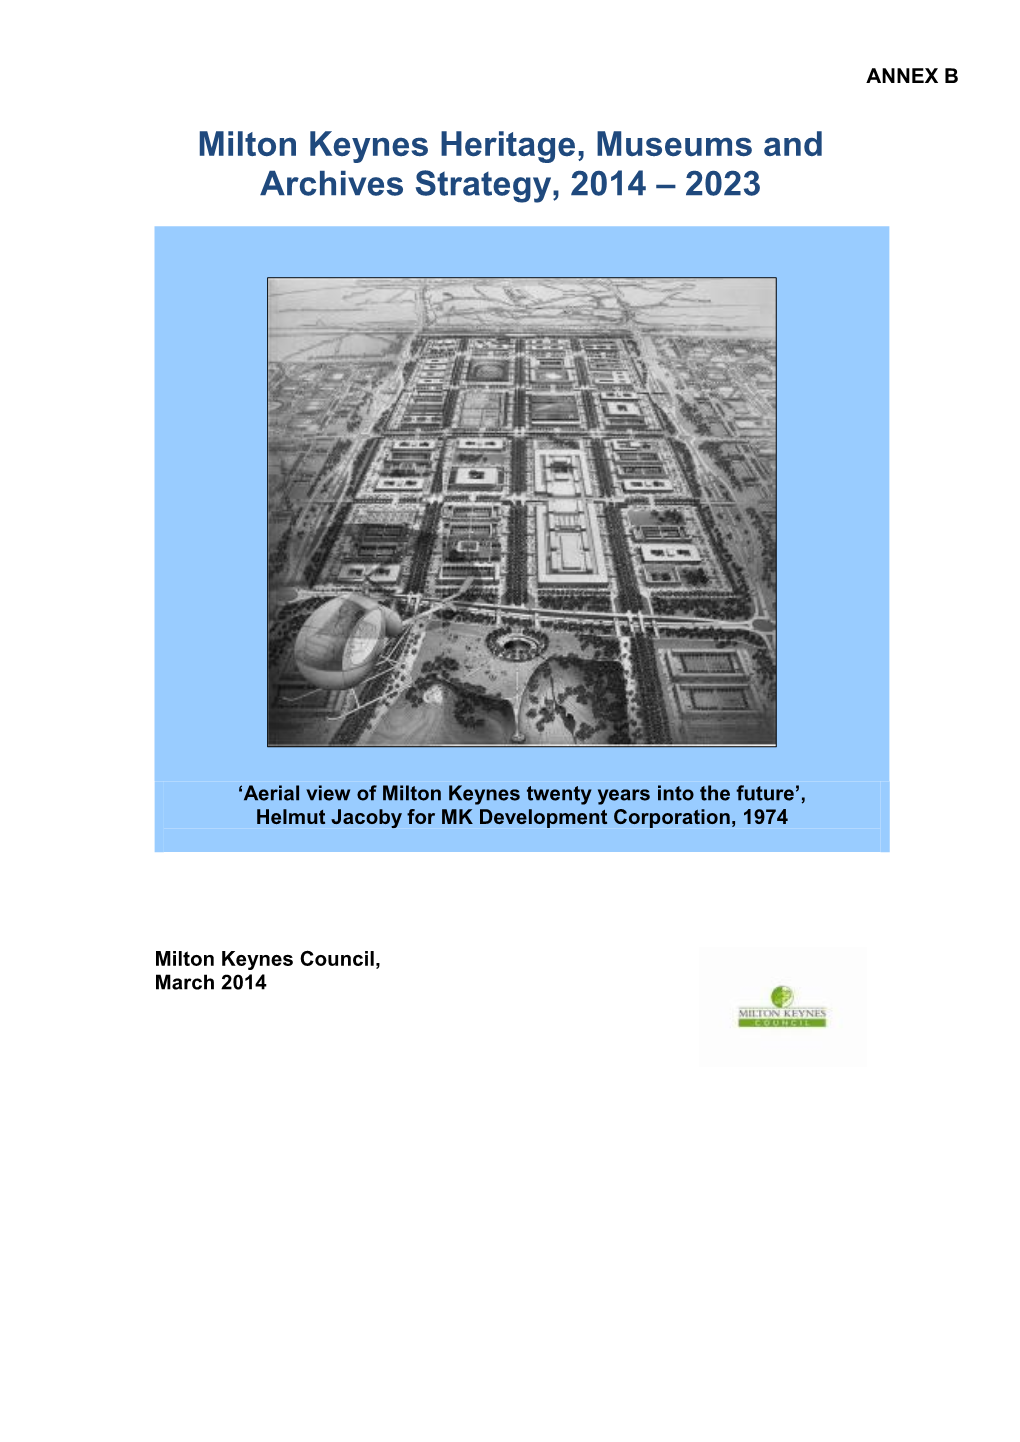 Milton Keynes Heritage, Museums and Archives Strategy, 2014 – 2023